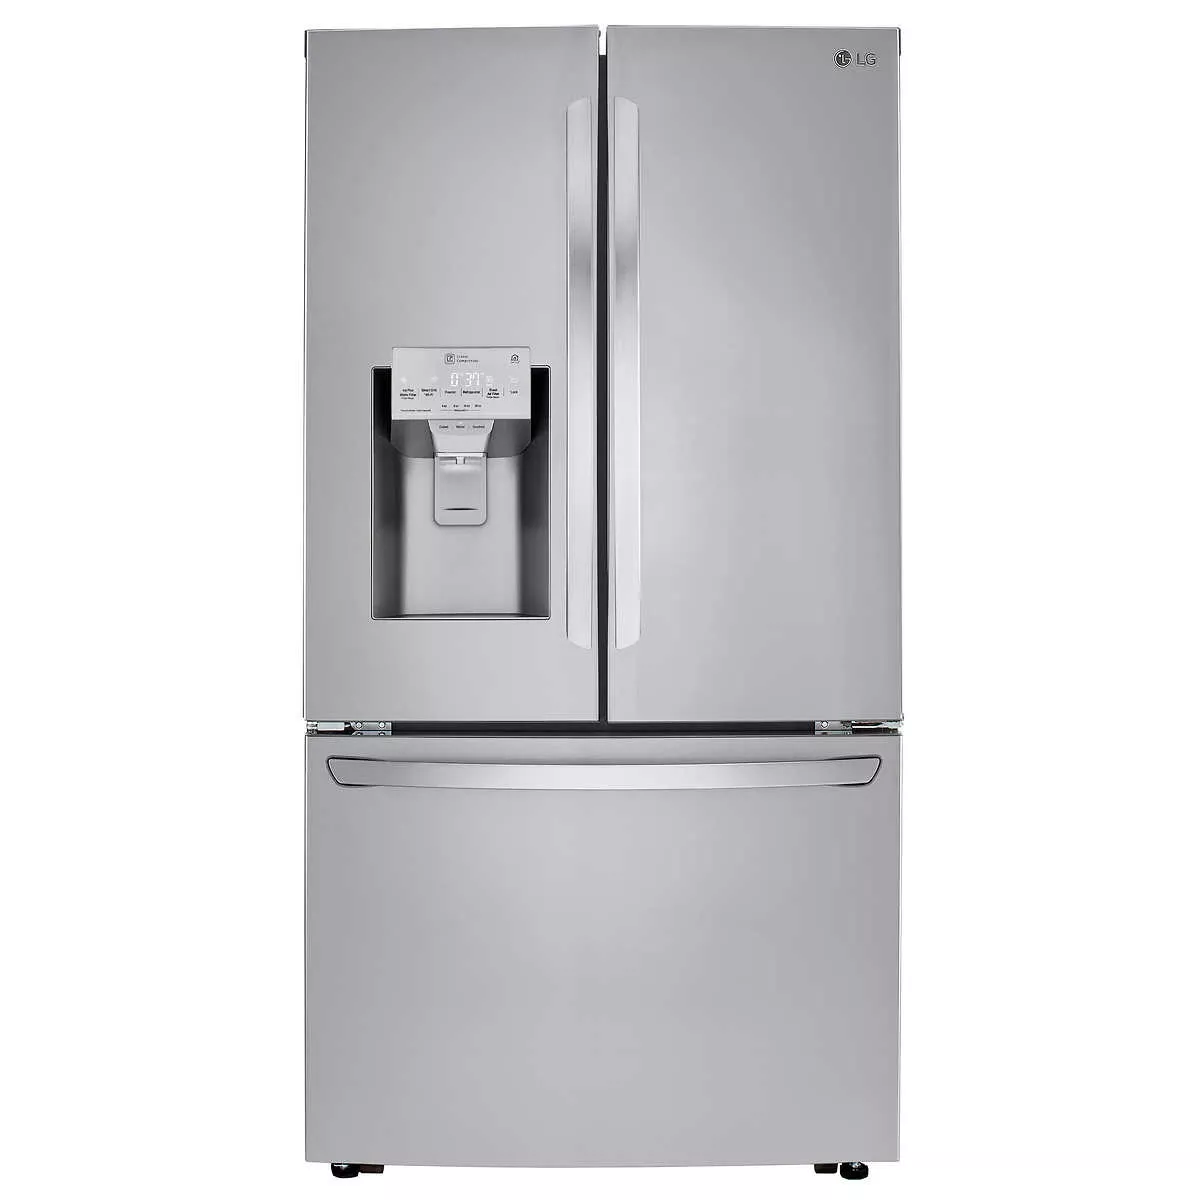 LG 24CuFt Wi-Fi Enabled French Door Counter-Depth Refrigerator with CoolGuard